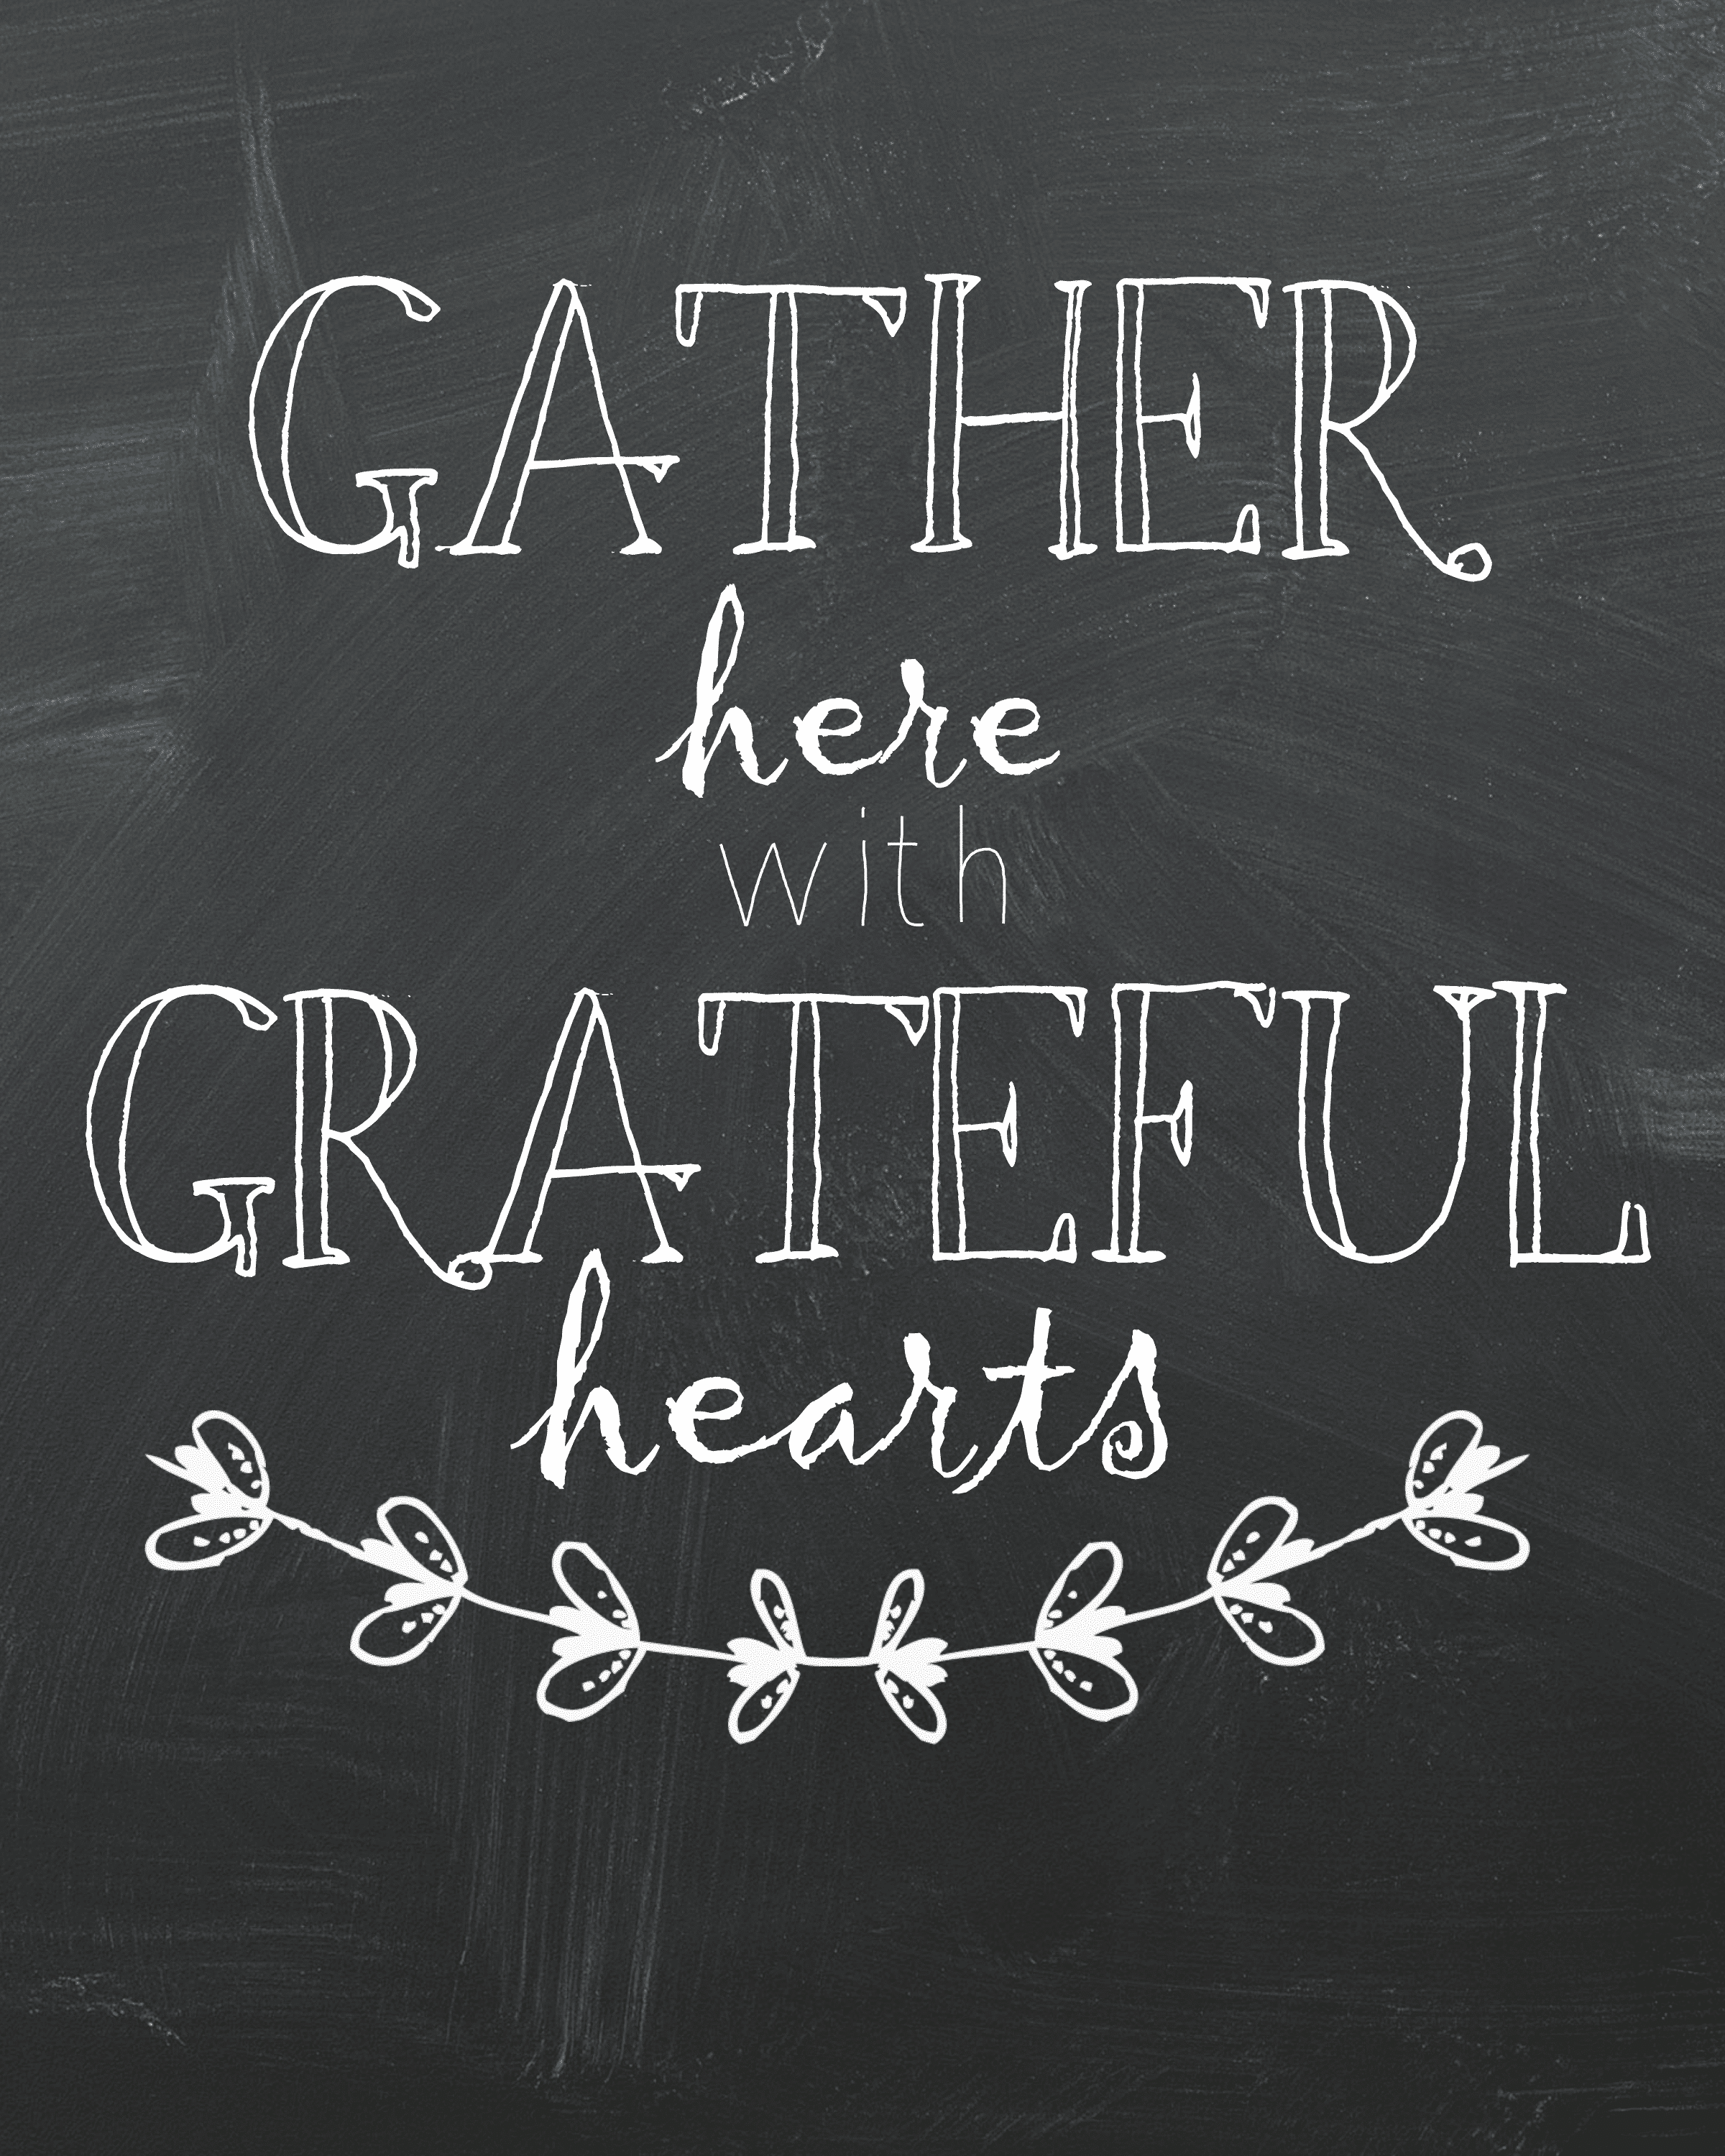 Free Fall Printables Pockets Full Of Wonder Chalkboard Gather Here With Grateful Hearts